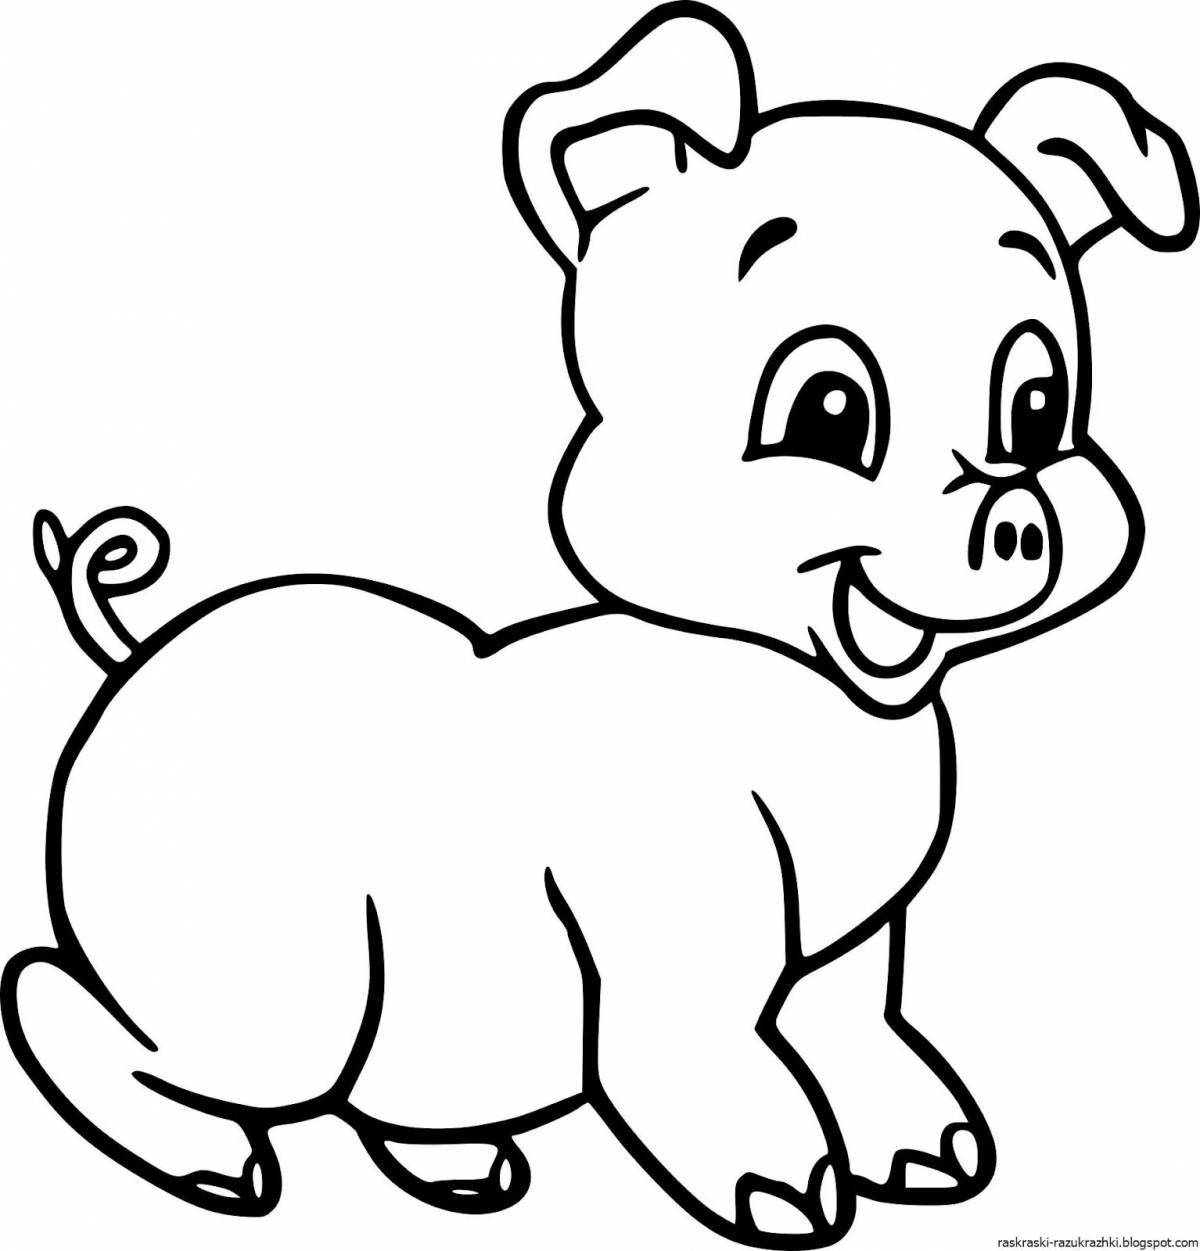 Great coloring book for kids Piglet